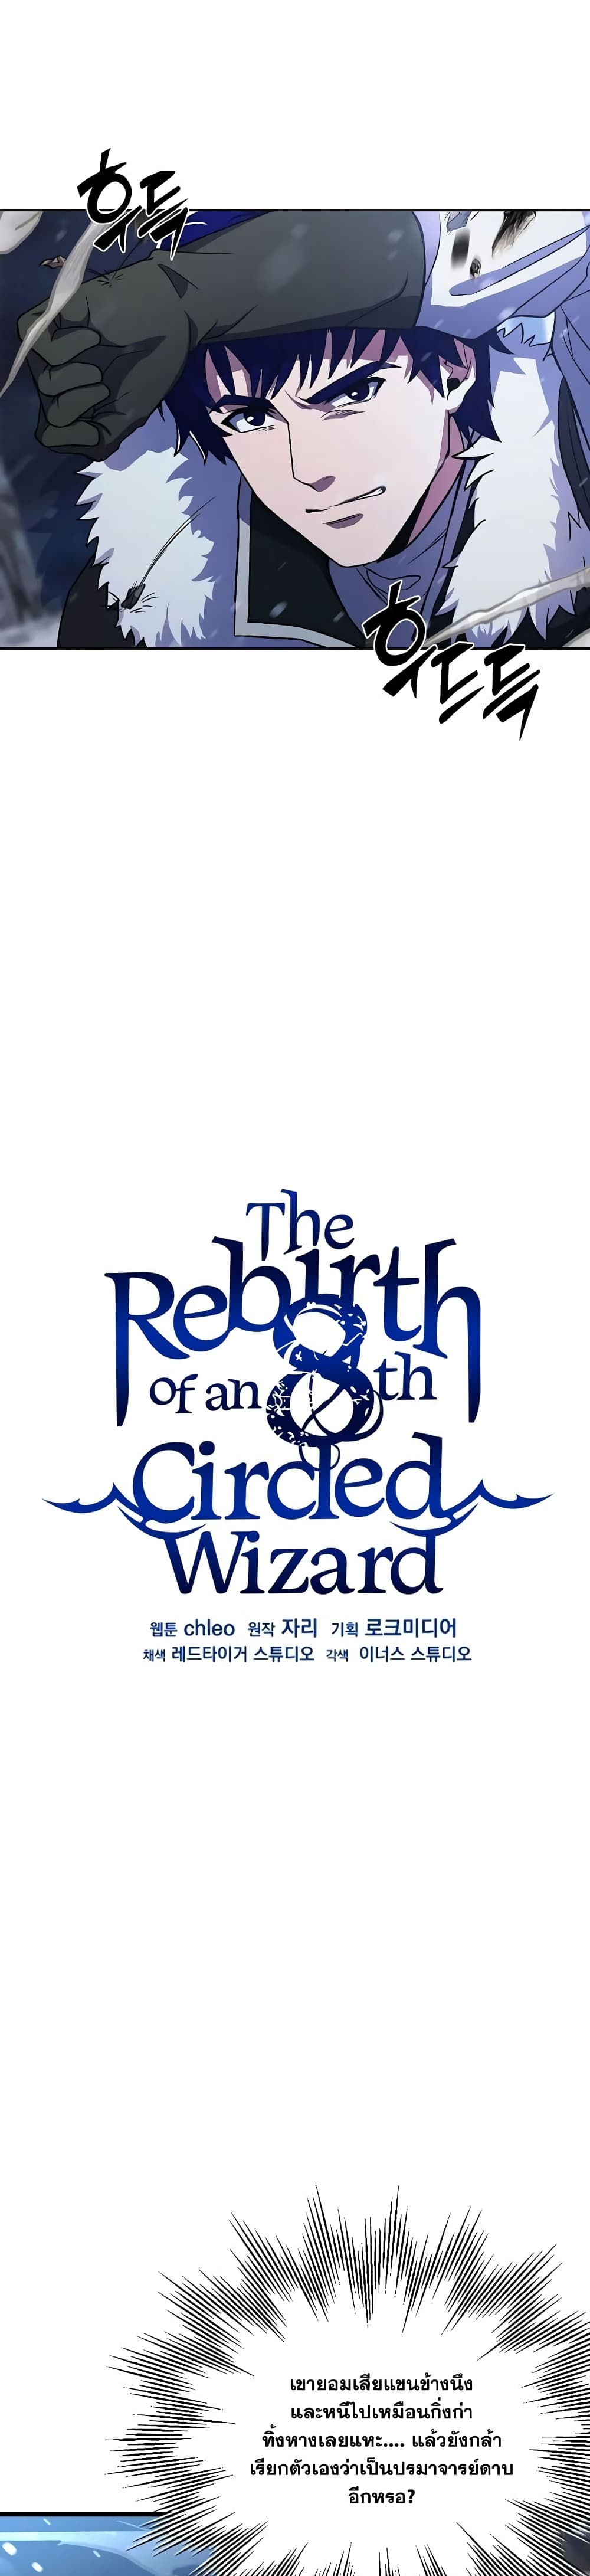 The Rebirth of an 8th Circled Wizard 63-63